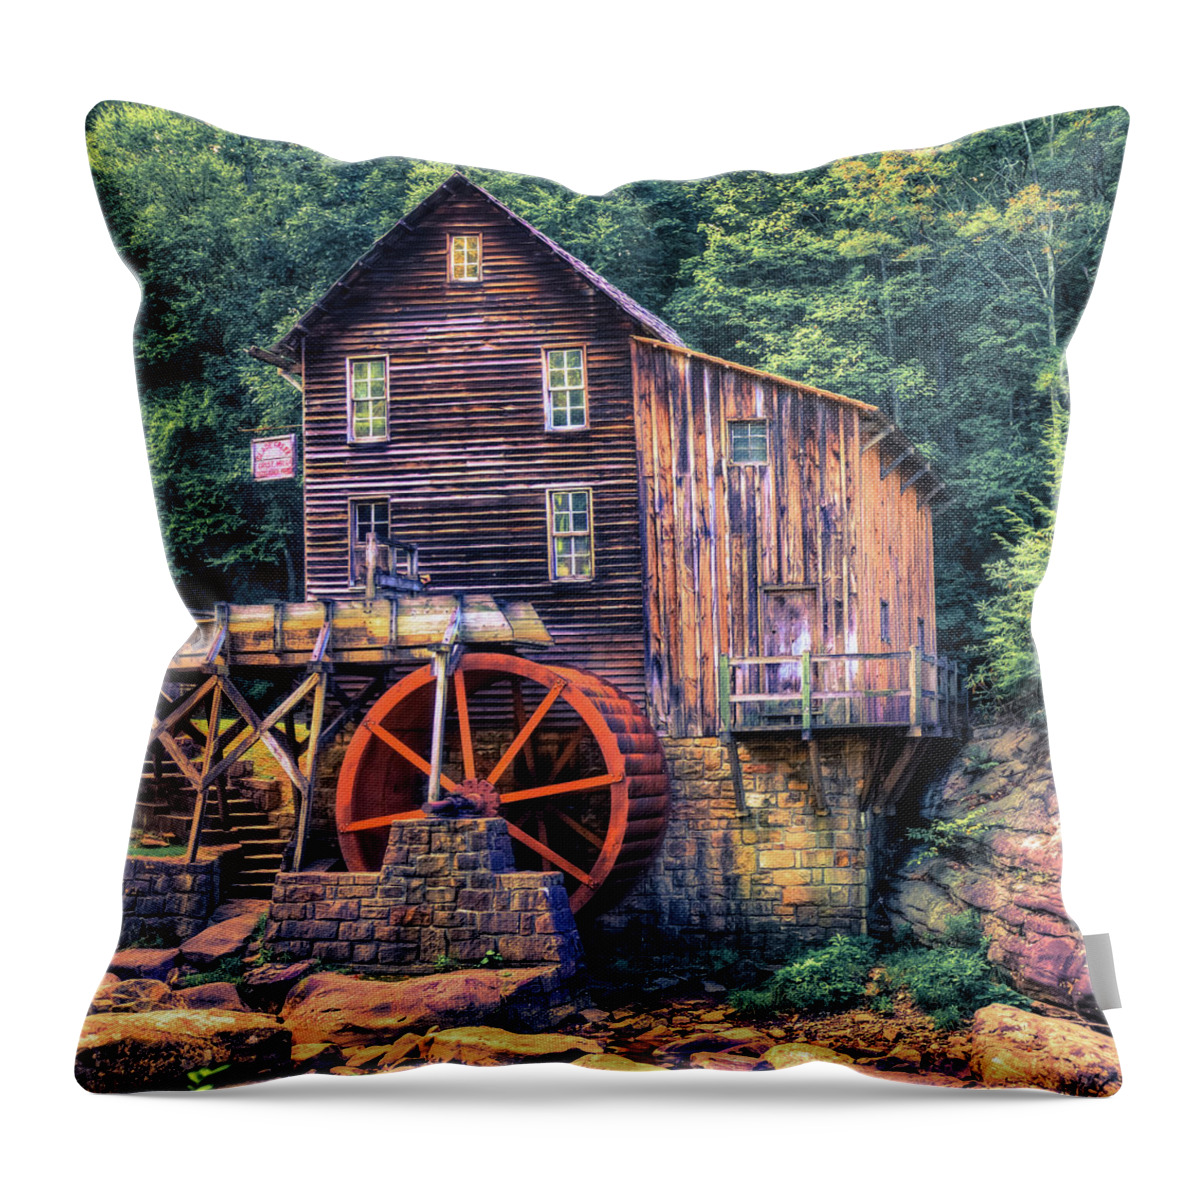 America Throw Pillow featuring the photograph Old Mill in Beckley West Virginia by Gregory Ballos